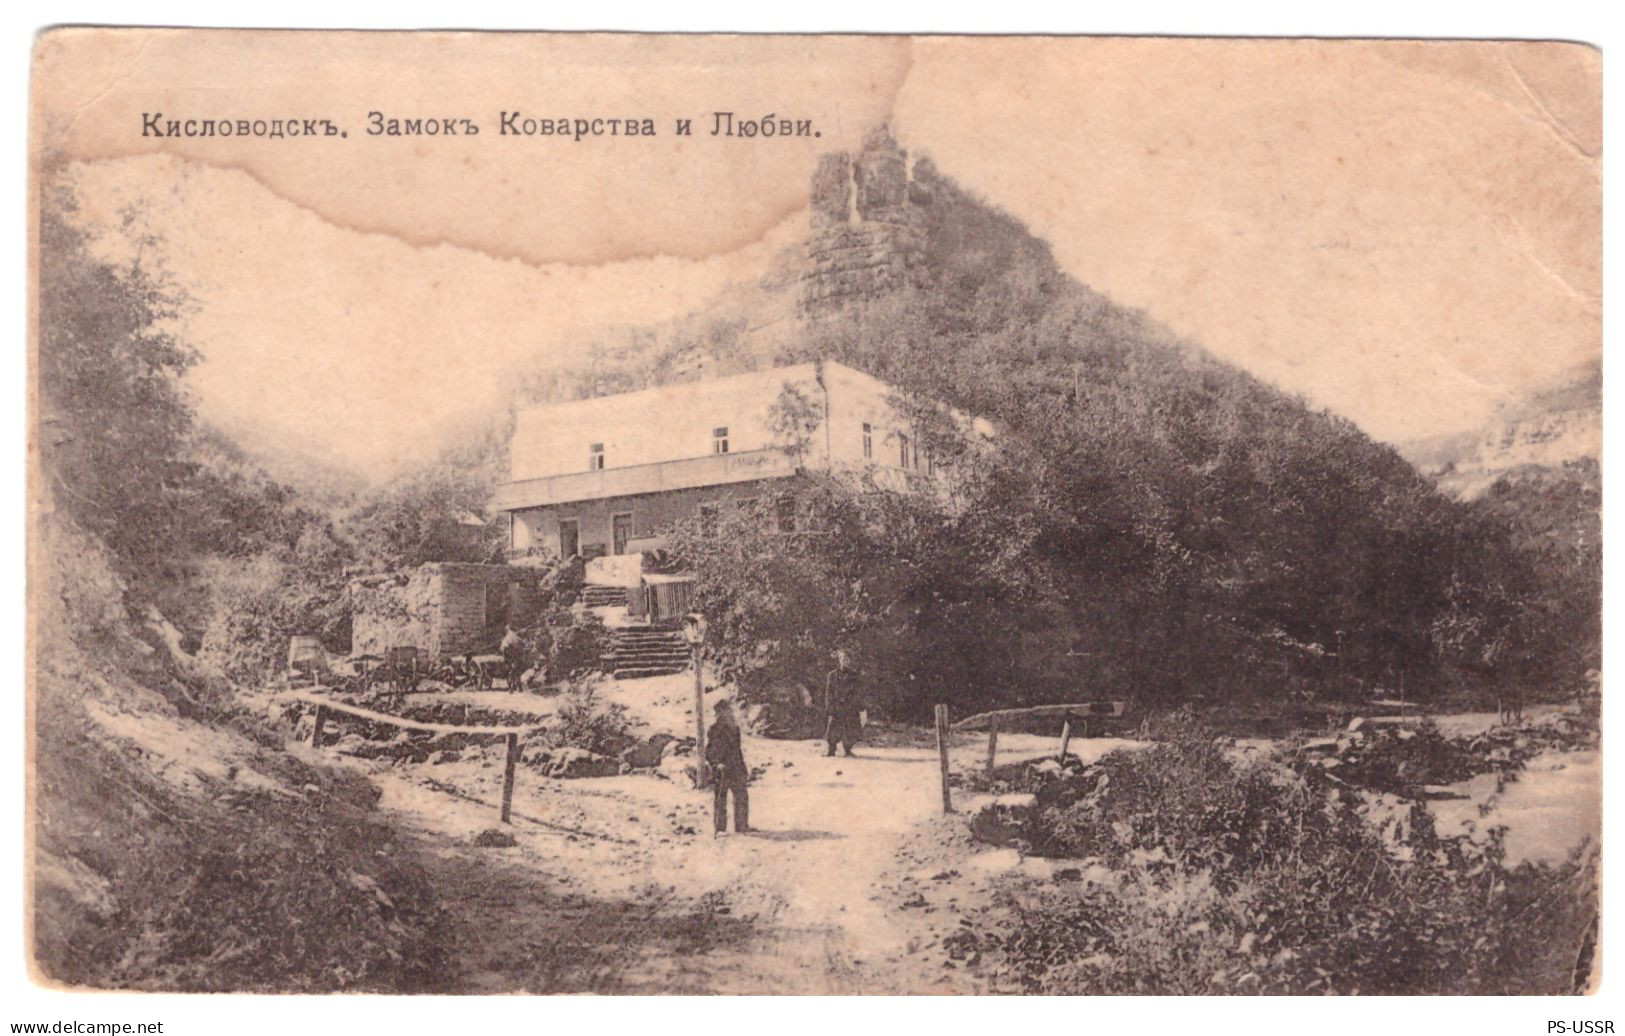 RUSSIA  Before 1940 KISLOVODSK CASTLE OF LOVE AND DECEIT POSTCARD UNUSED - Rusia